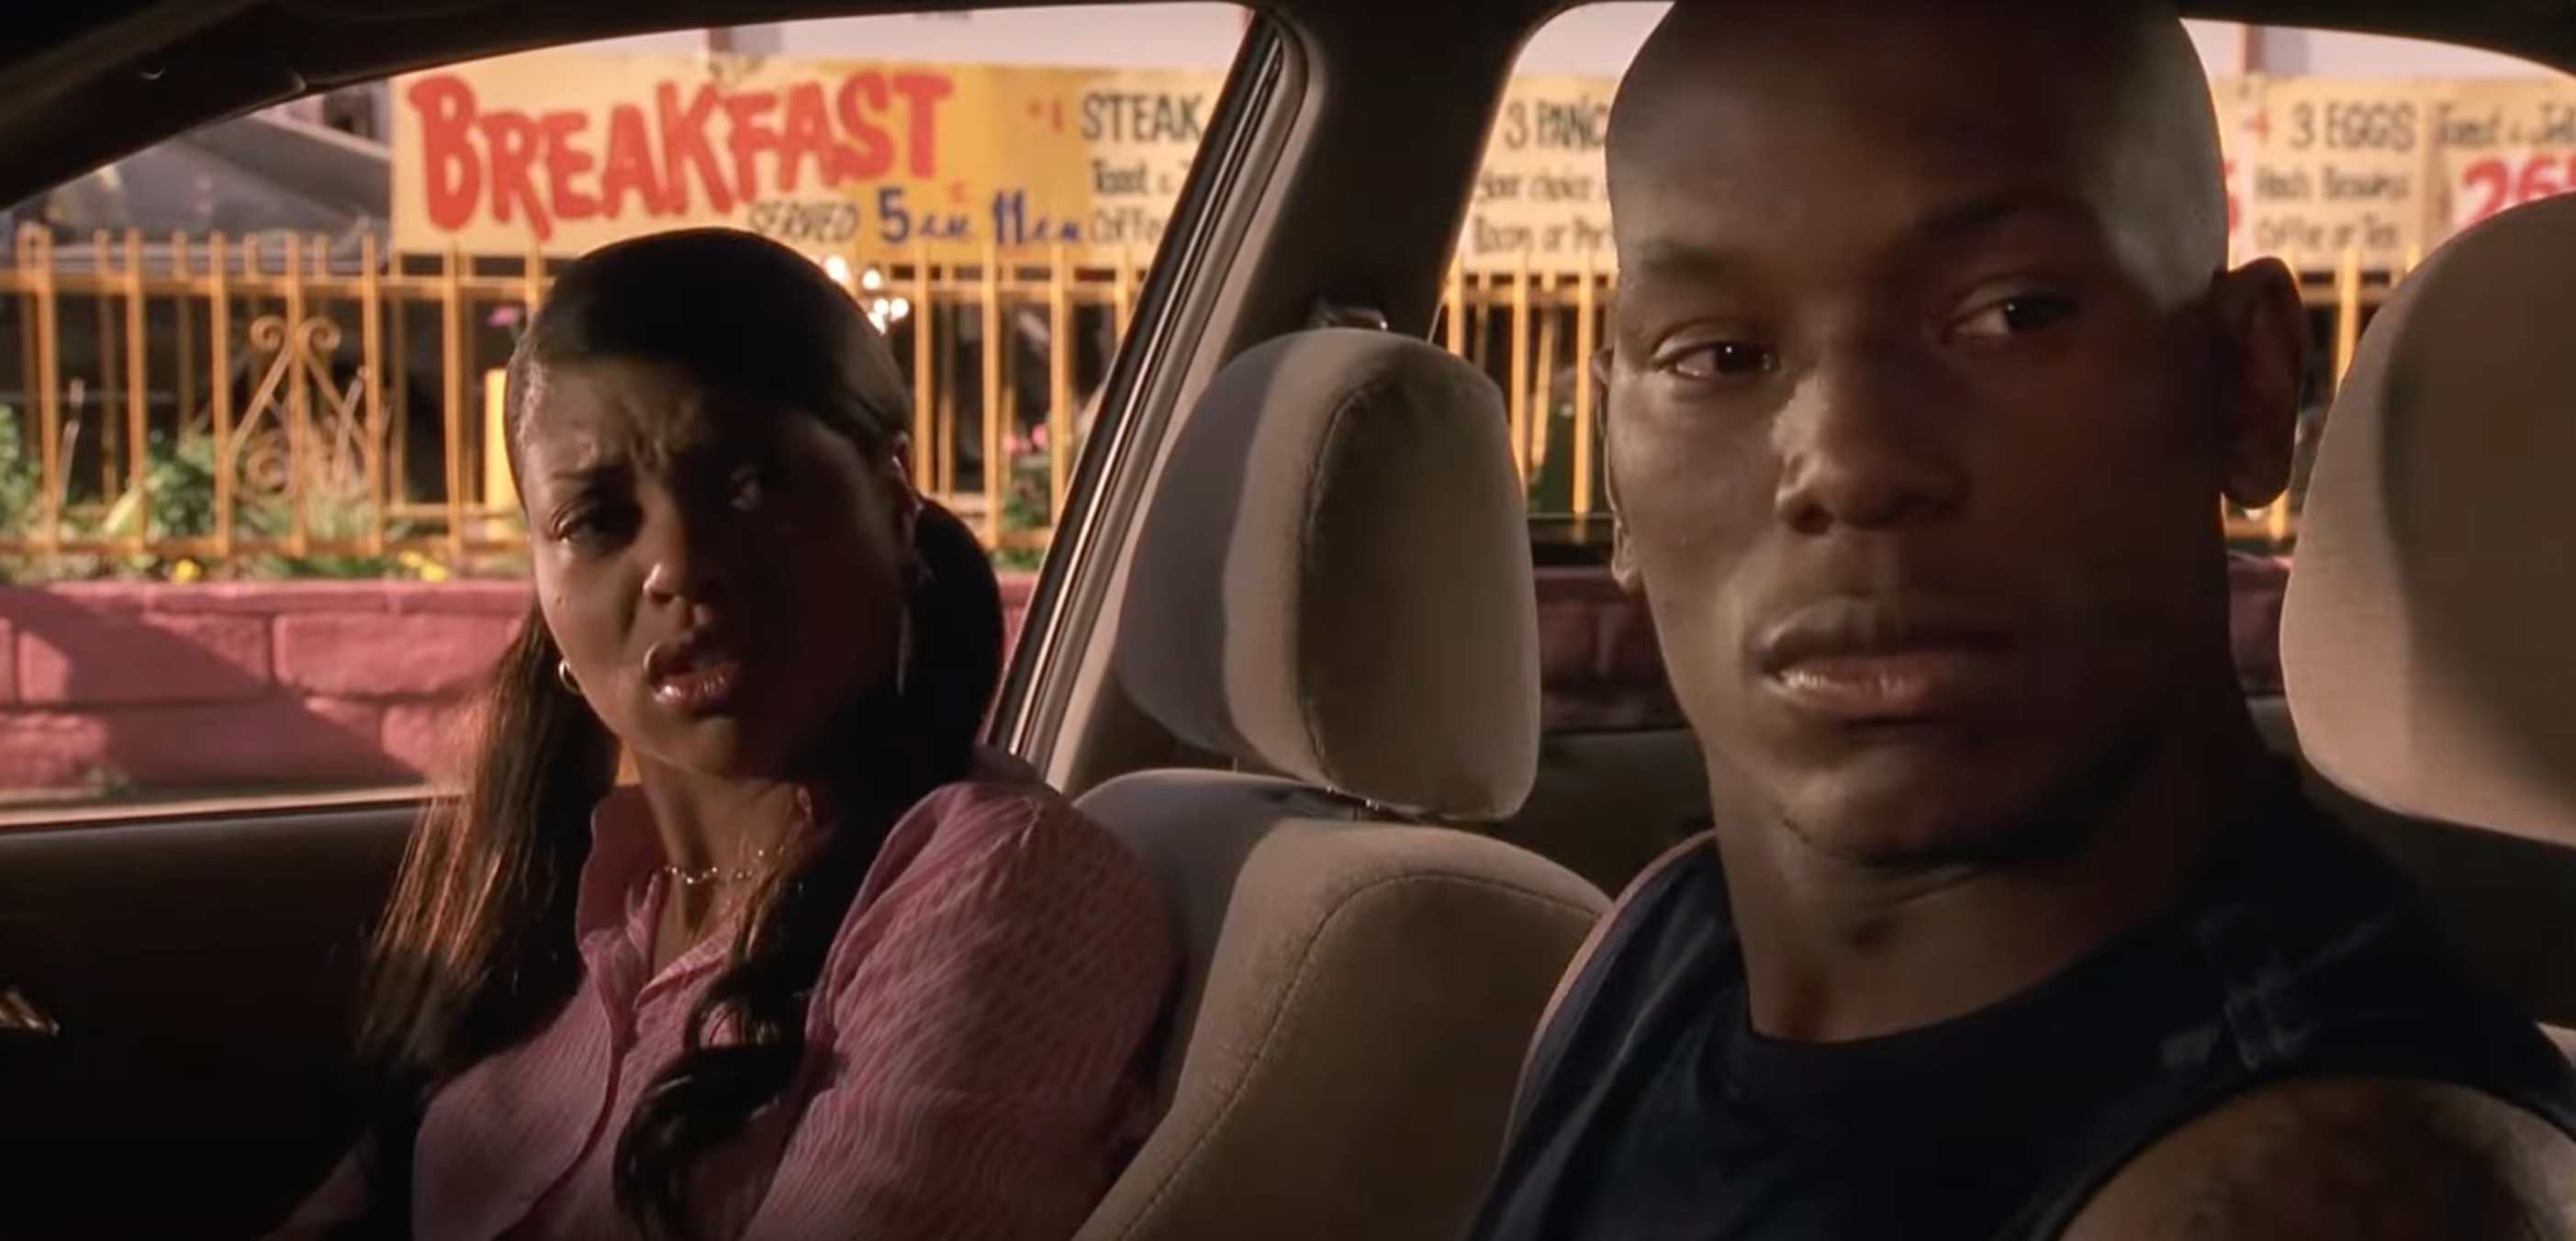 Two actors in a car, the woman looks concerned and the man pensive, in a dramatic scene